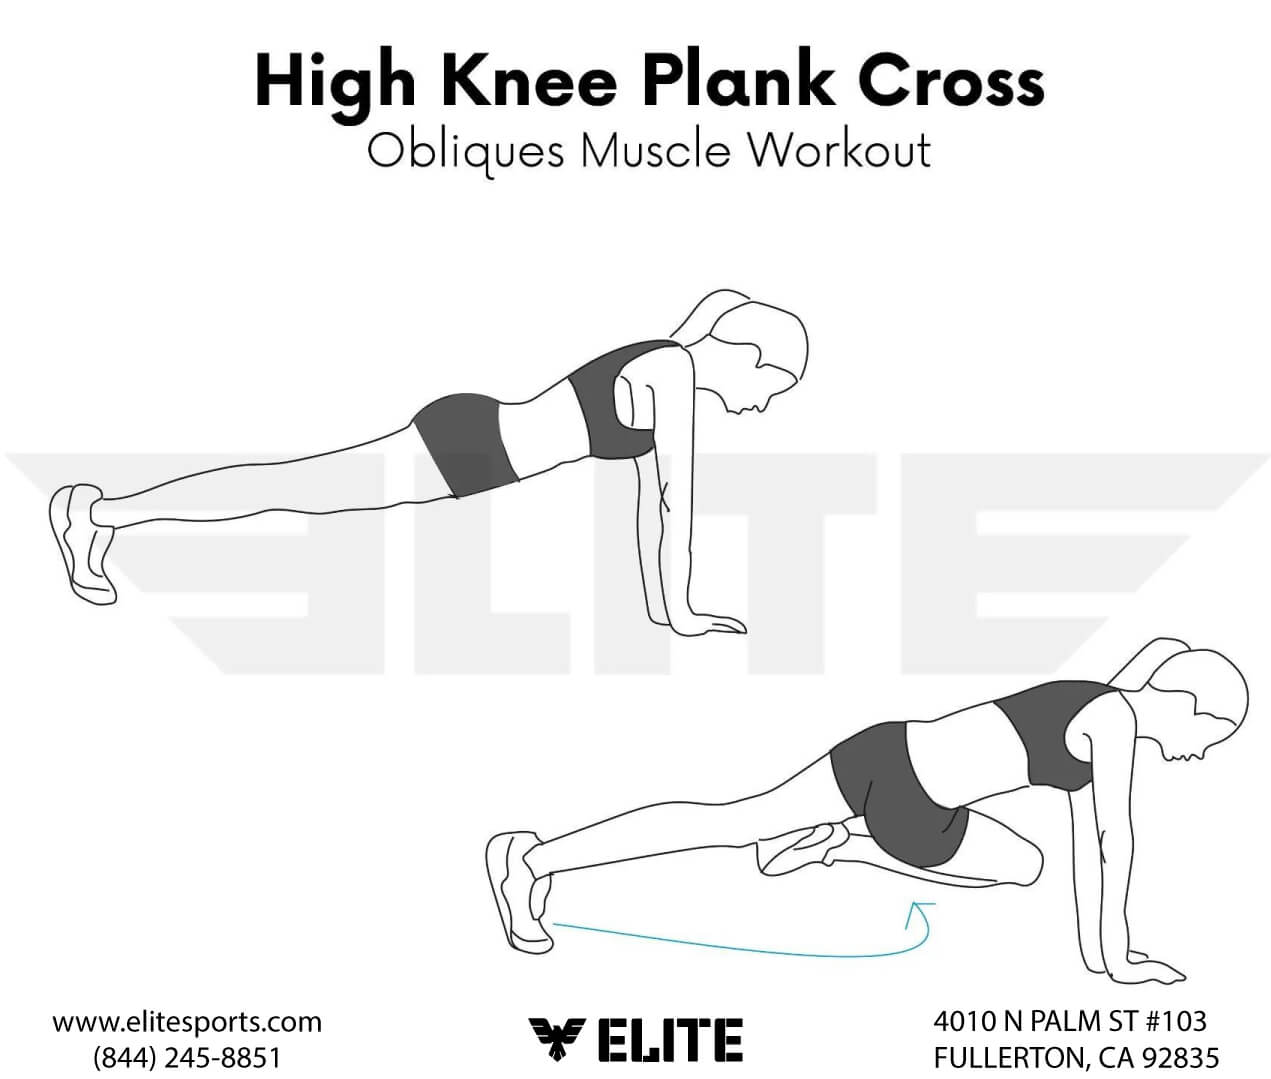 High Knee Plank Cross: Oblique Muscle Exercises